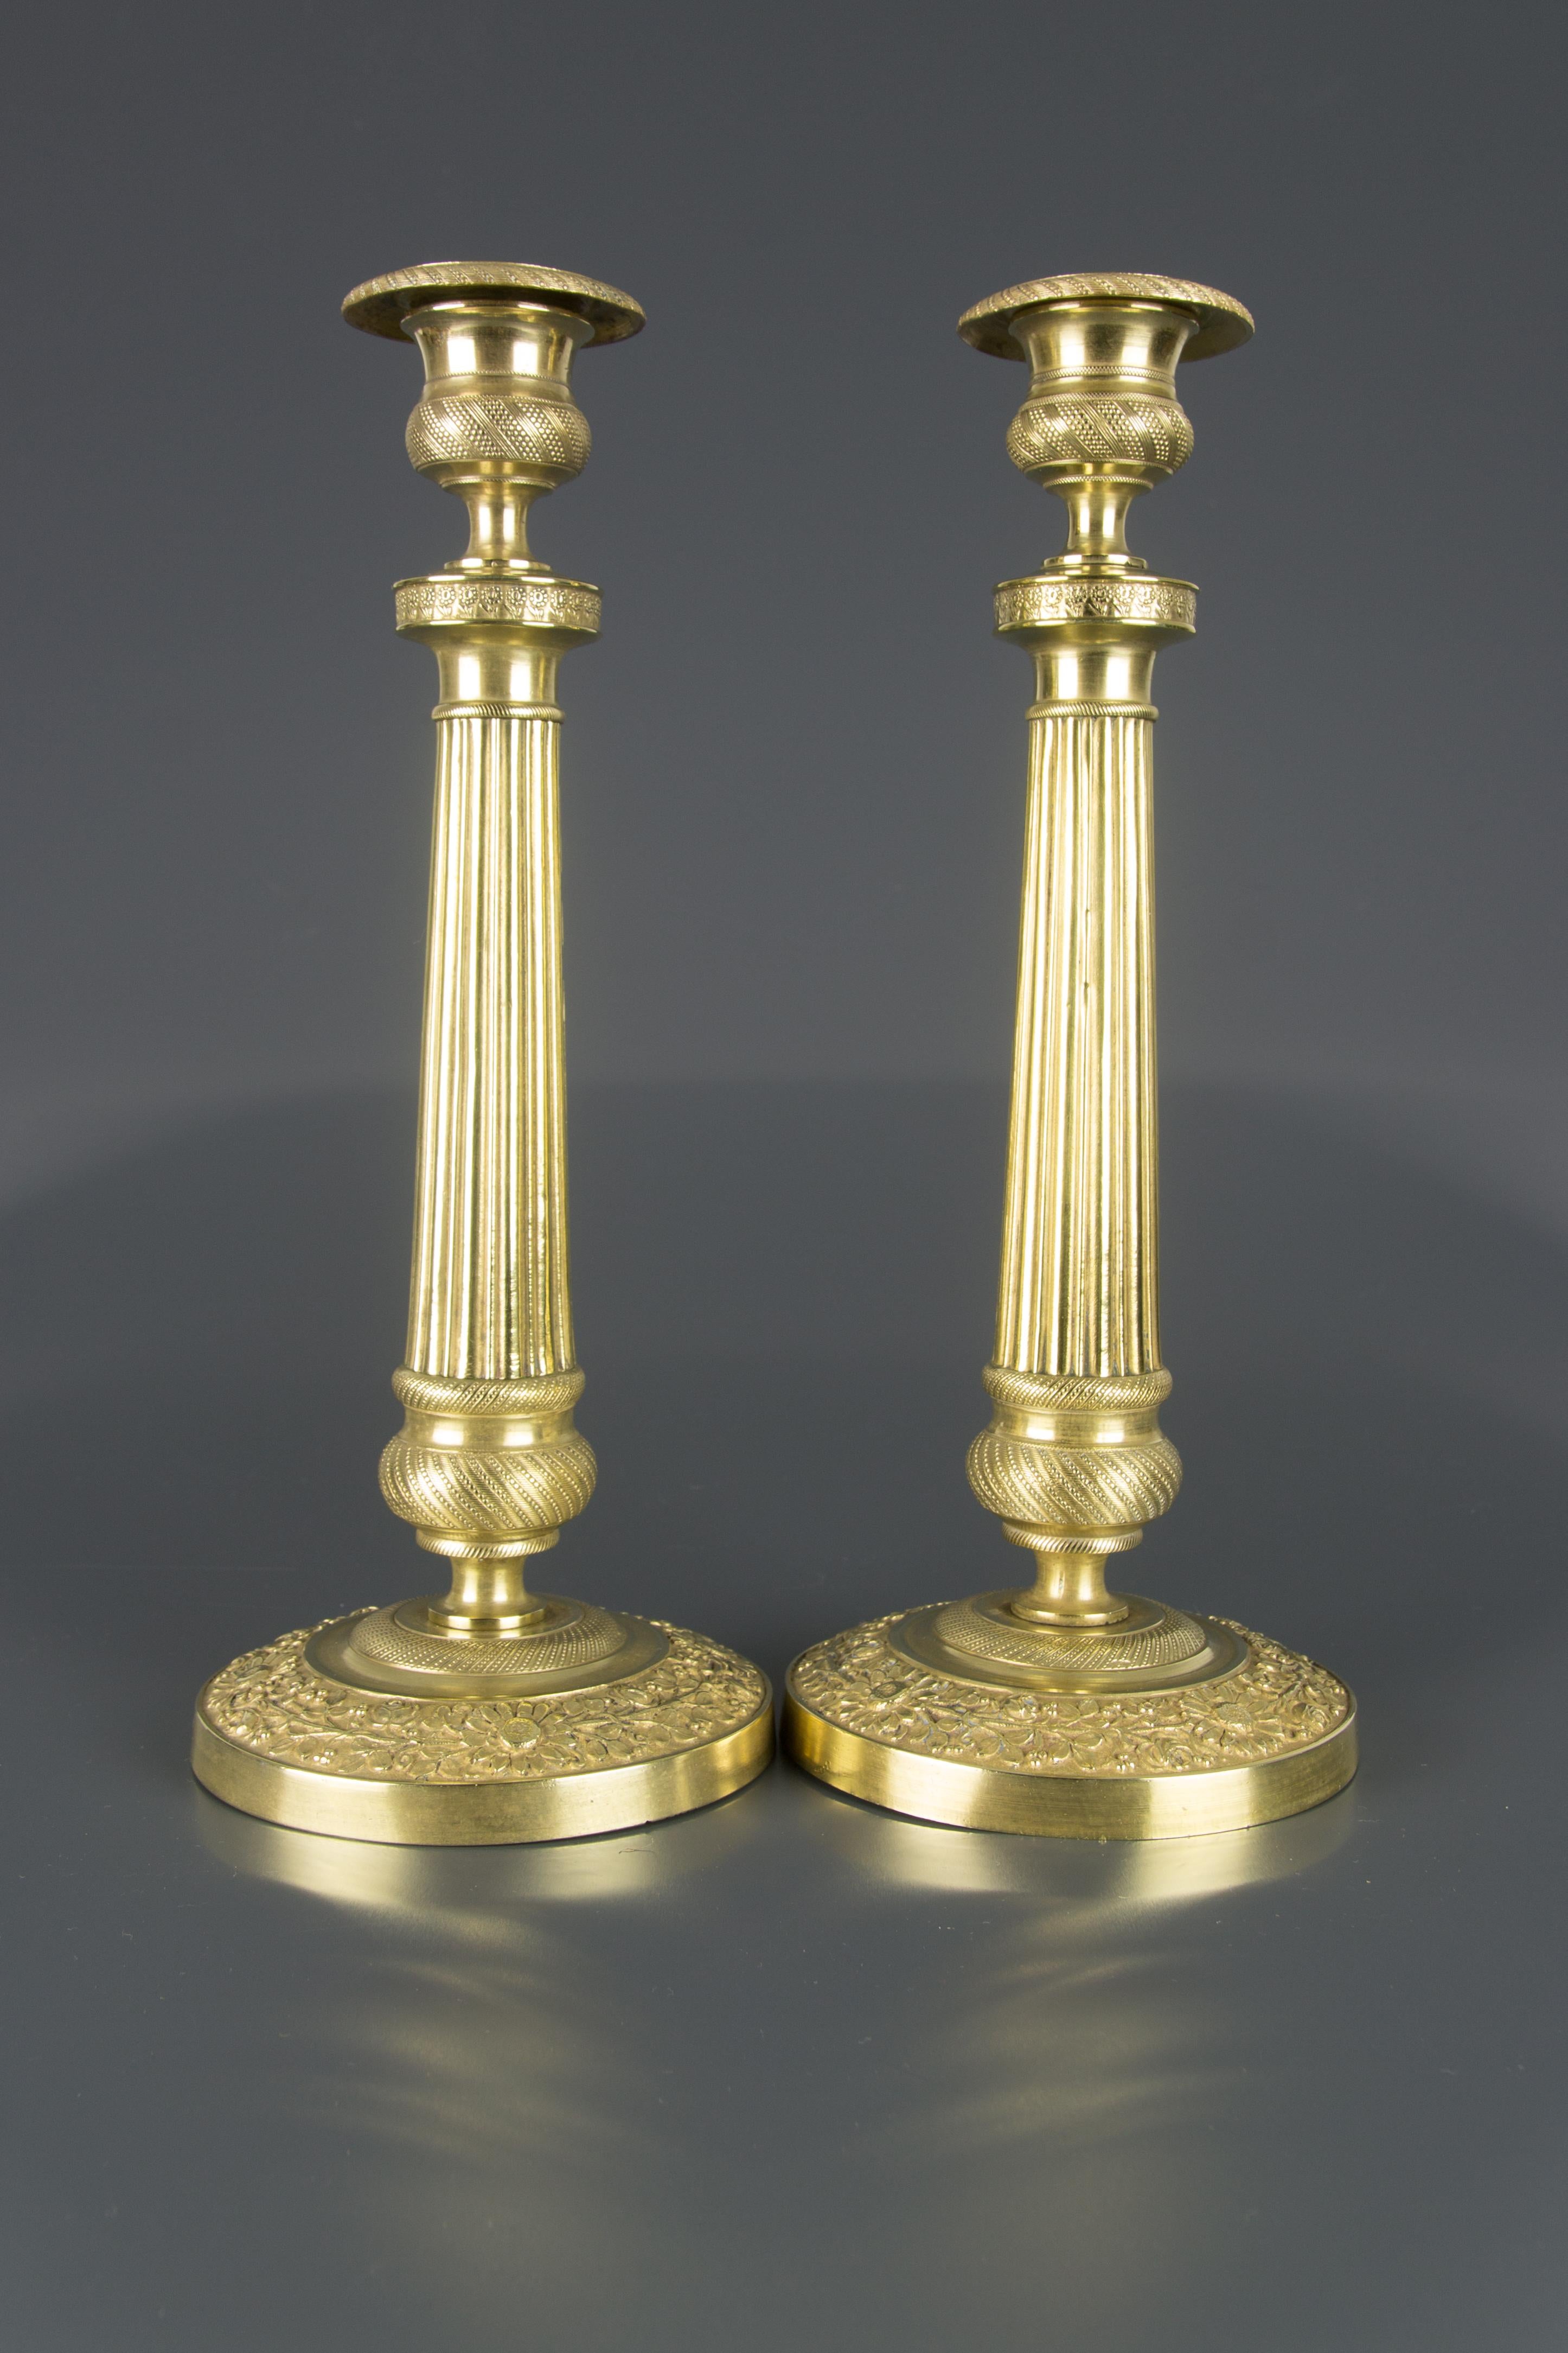 A beautiful pair of French Restauration style brass candlesticks with removable bobeches (drip trays). Each candlestick features a fluted columnar stem, has an ornate collar, decorated with flowers, and is resting on a circular base highlighted with